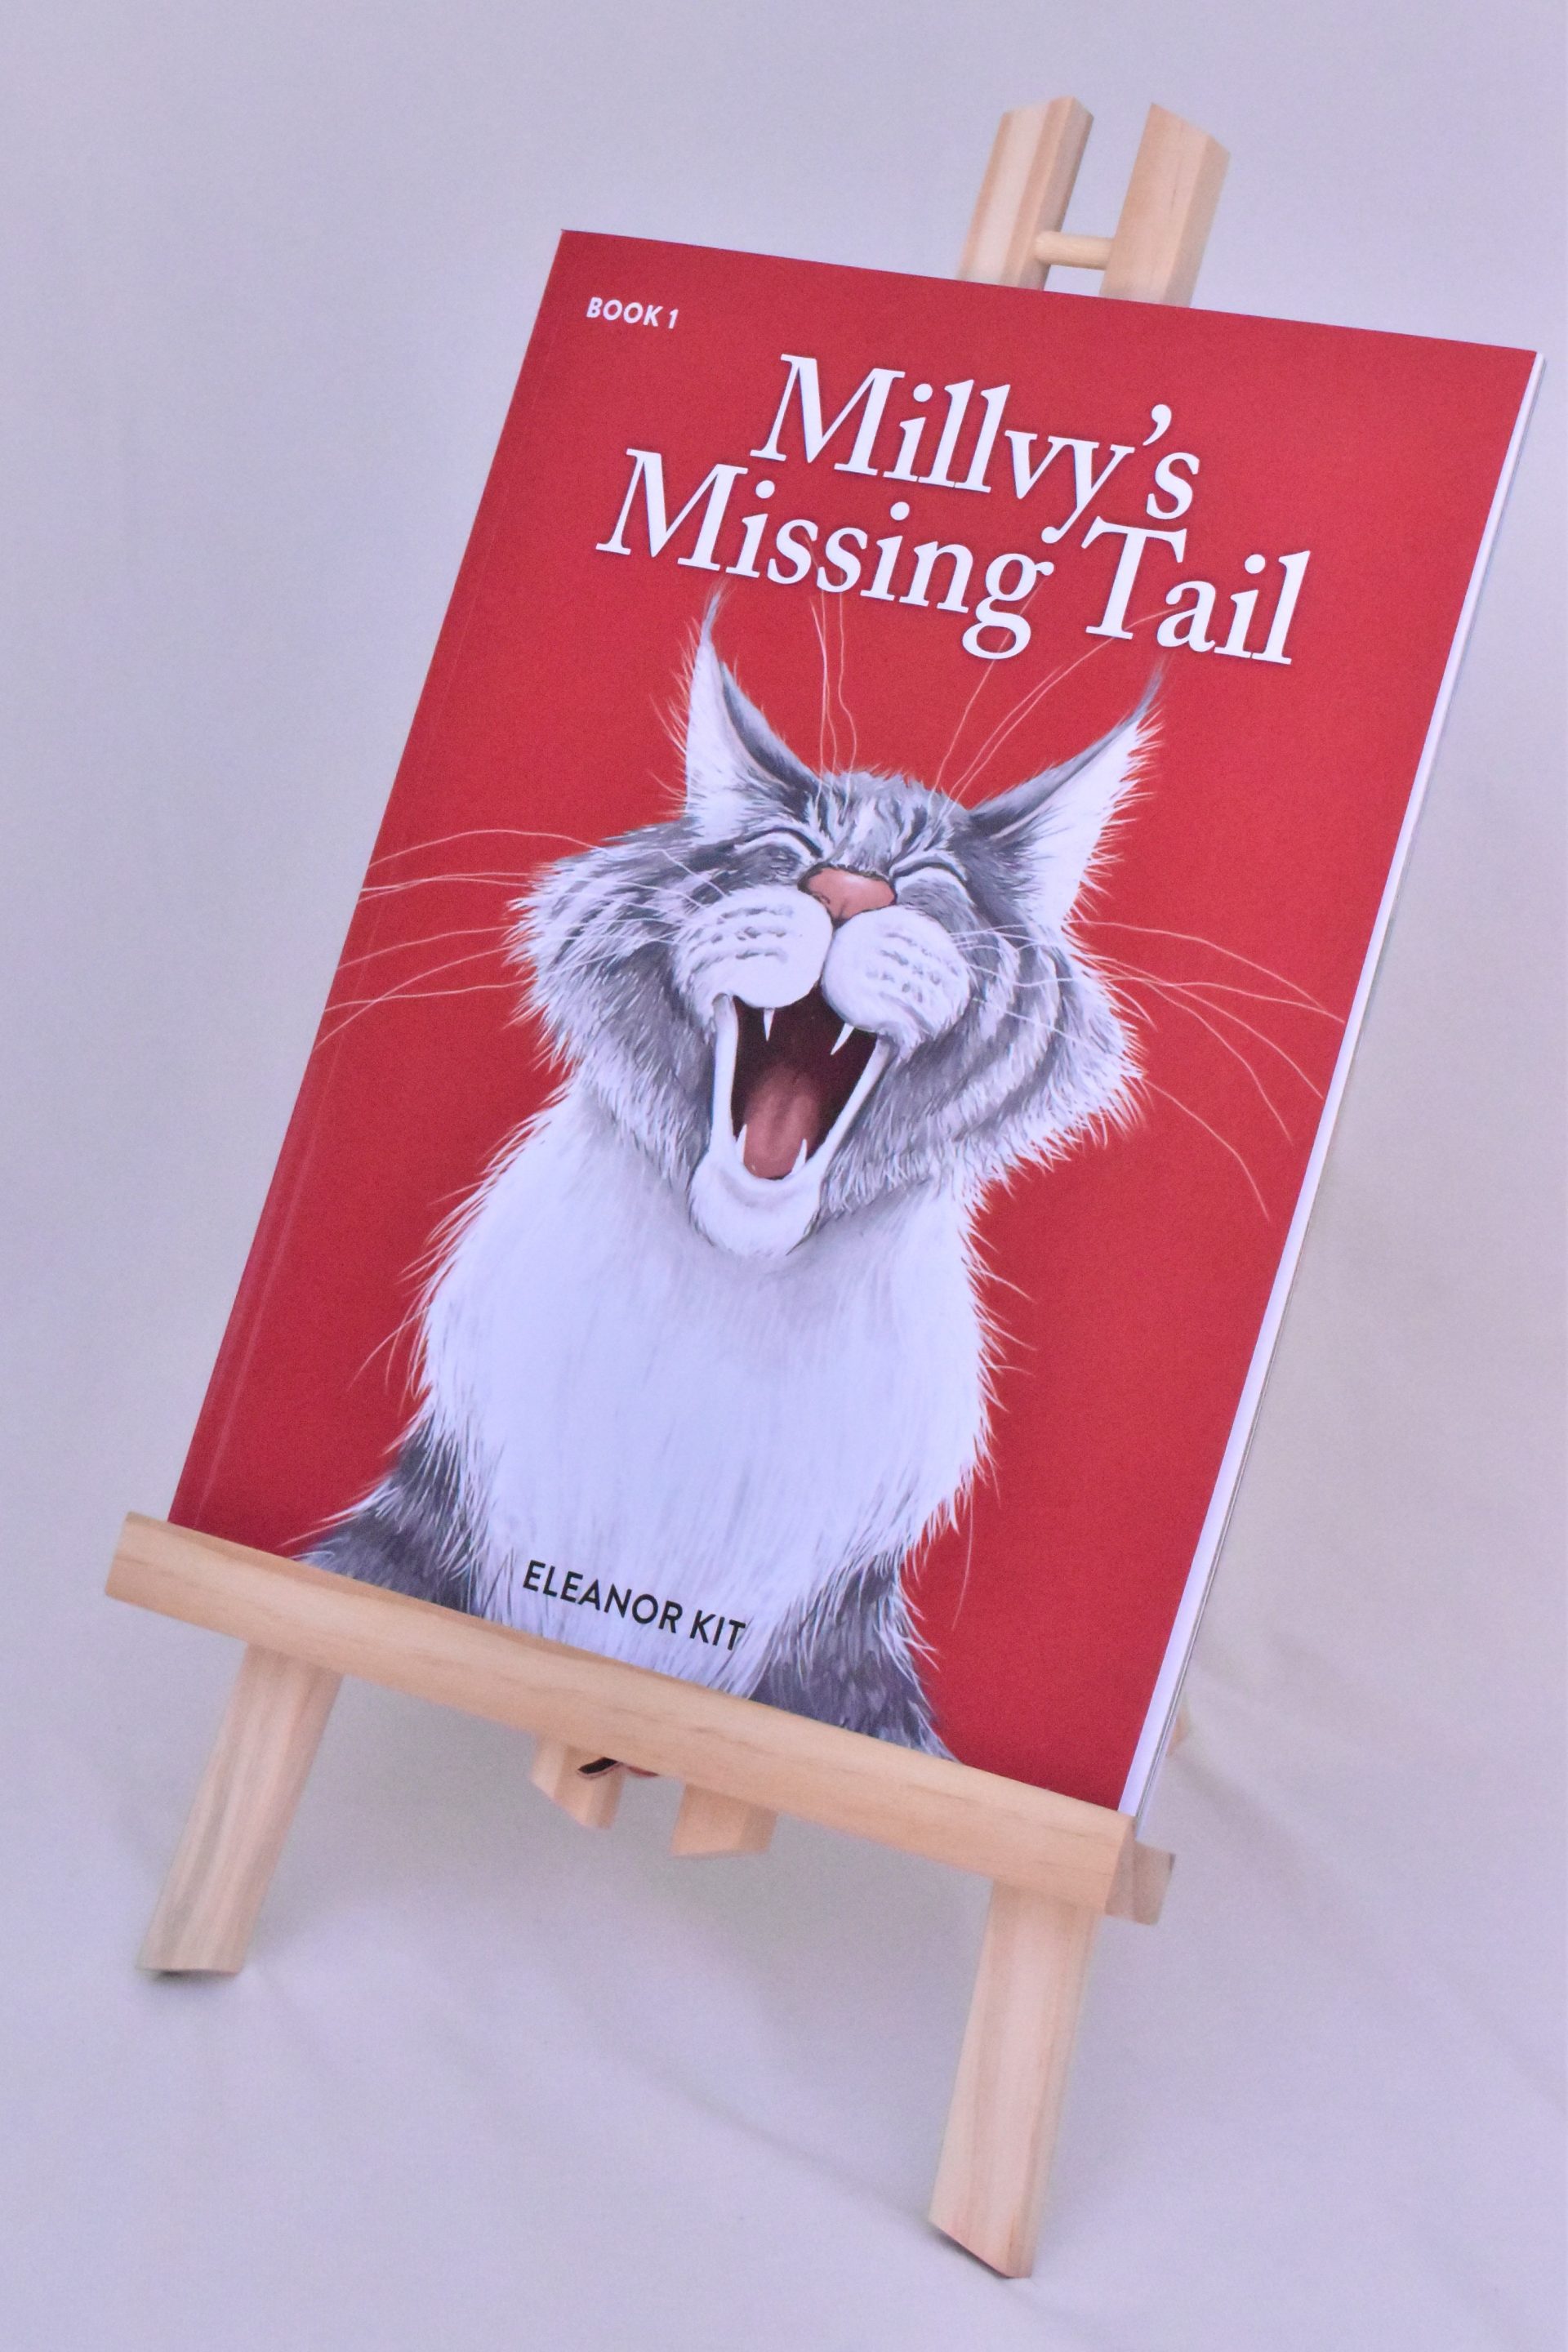 Millvy's Missing Tail Series